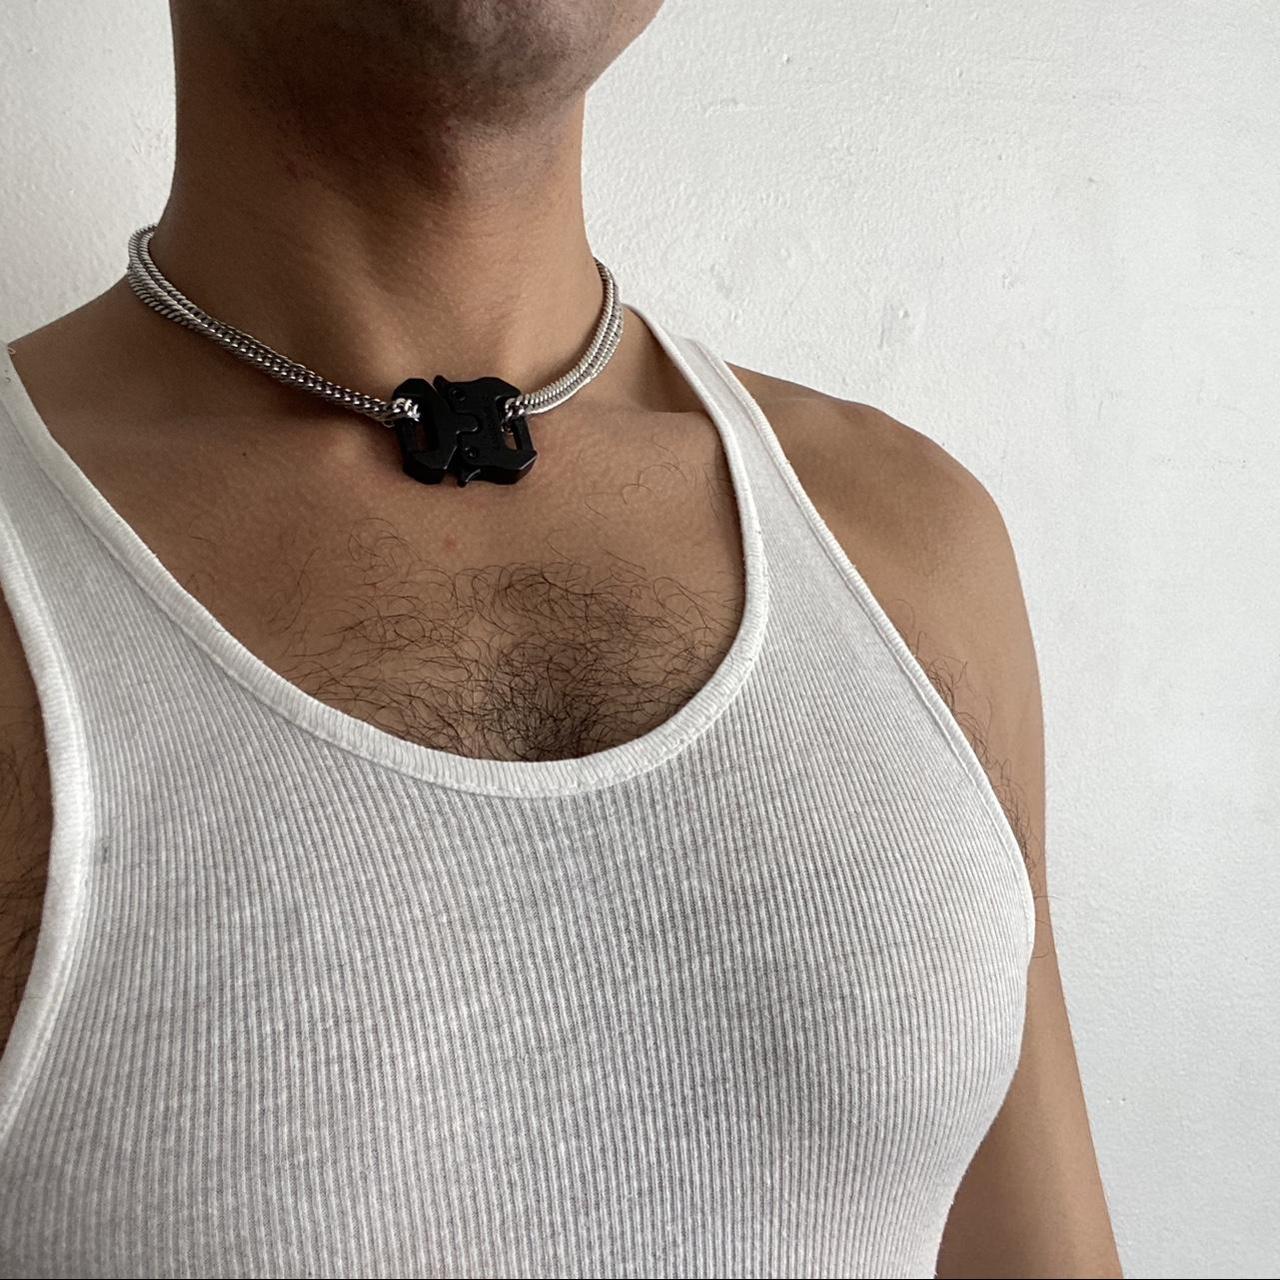 Men's Silver and Black Jewellery (2)